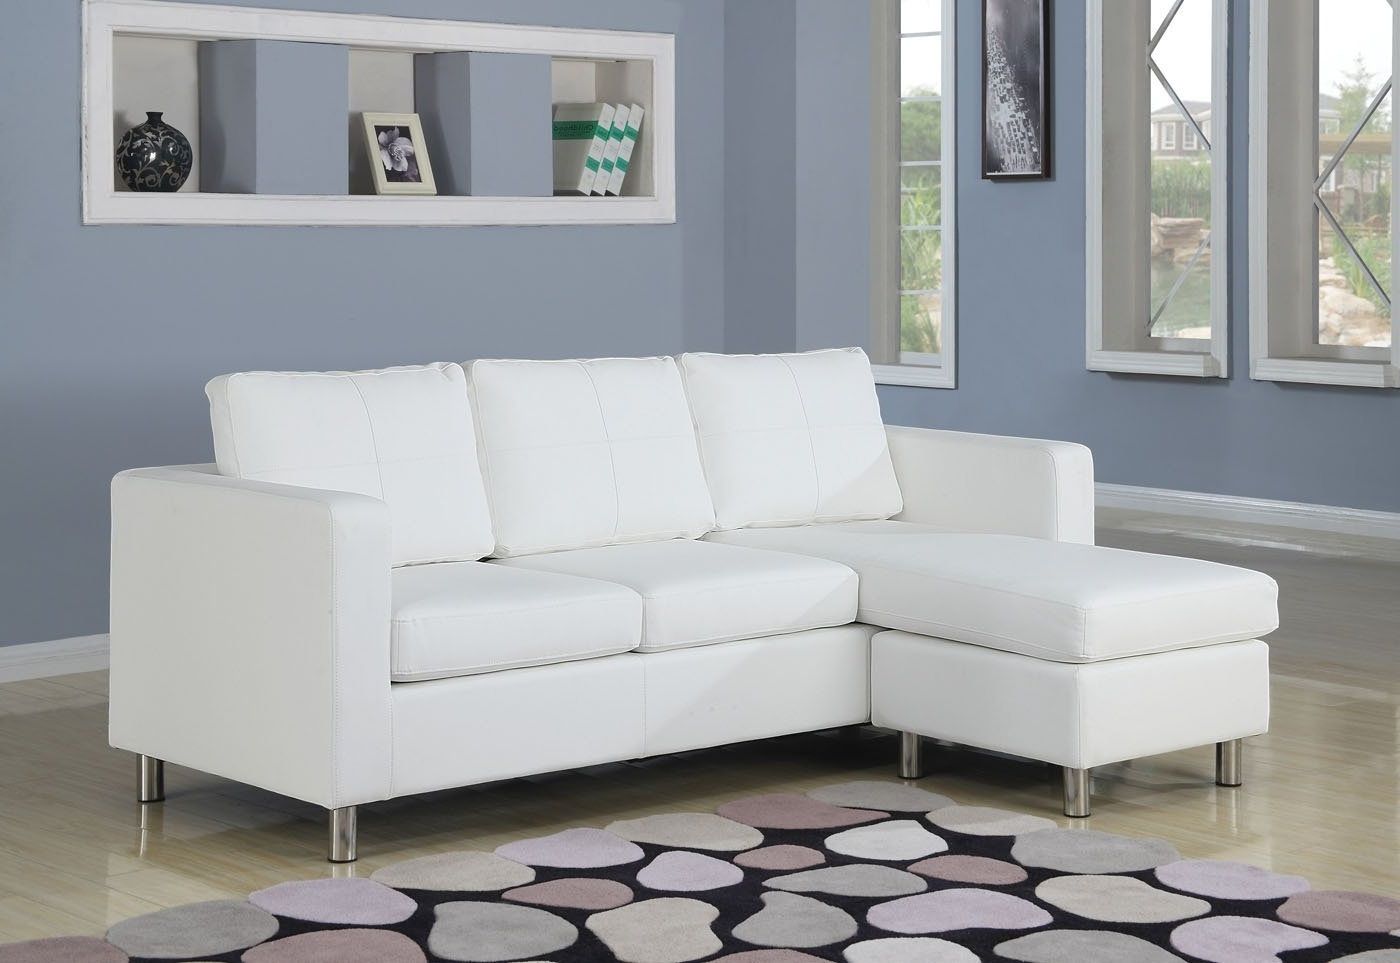 Small Sectional Sofa With Chaise: Perfect Choice For A In 4pc Crowningshield Contemporary Chaise Sectional Sofas (View 14 of 15)